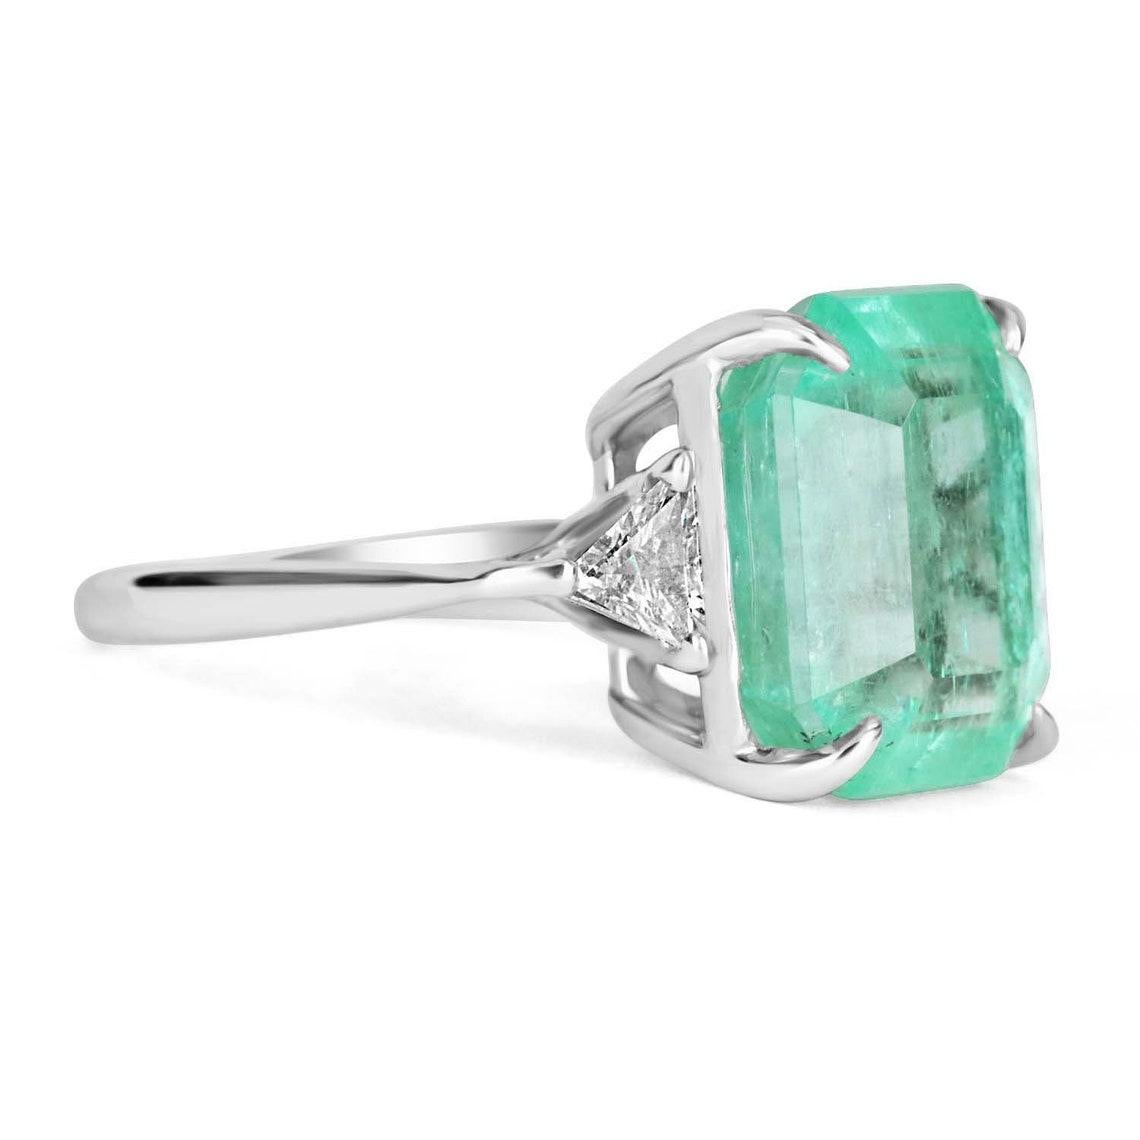 A classic Colombian emerald and diamond engagement, statement, or right-hand ring. Dexterously crafted in gleaming 18K gold this ring features a 9.01-carat natural Colombian emerald-emerald cut from the famous Chivor mines. Set in a secure prong